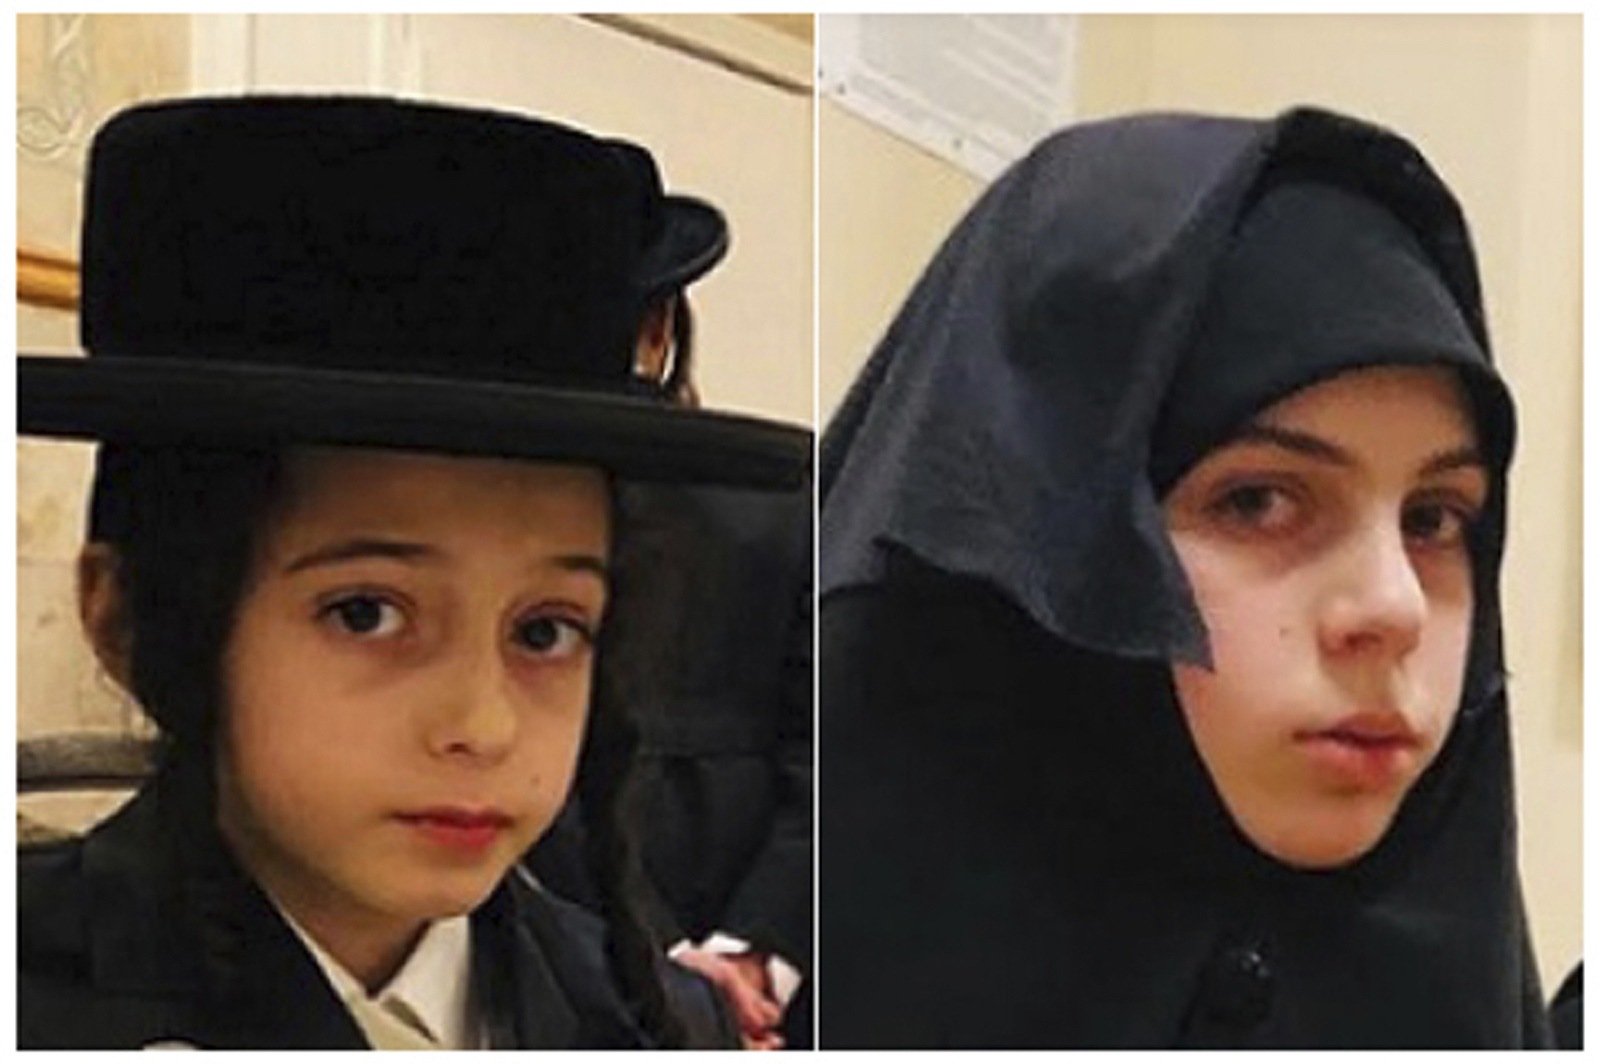 In this combination of two undated photos provided by the New York State Police, Chaim Teller, 12, and his sister Yante Teller, 14, are shown. The FBI arrested a New York man on charges accusing him of giving financial assistance to a group who kidnapped the two children whose mother fled an ultra-Orthodox Jewish sect in Guatemala. The kidnapping allegedly happened Dec. 8. Surveillance footage shows the children walking out of their upstate New York residence at 2:56 a.m. and entering a vehicle. (New York State Police via AP)